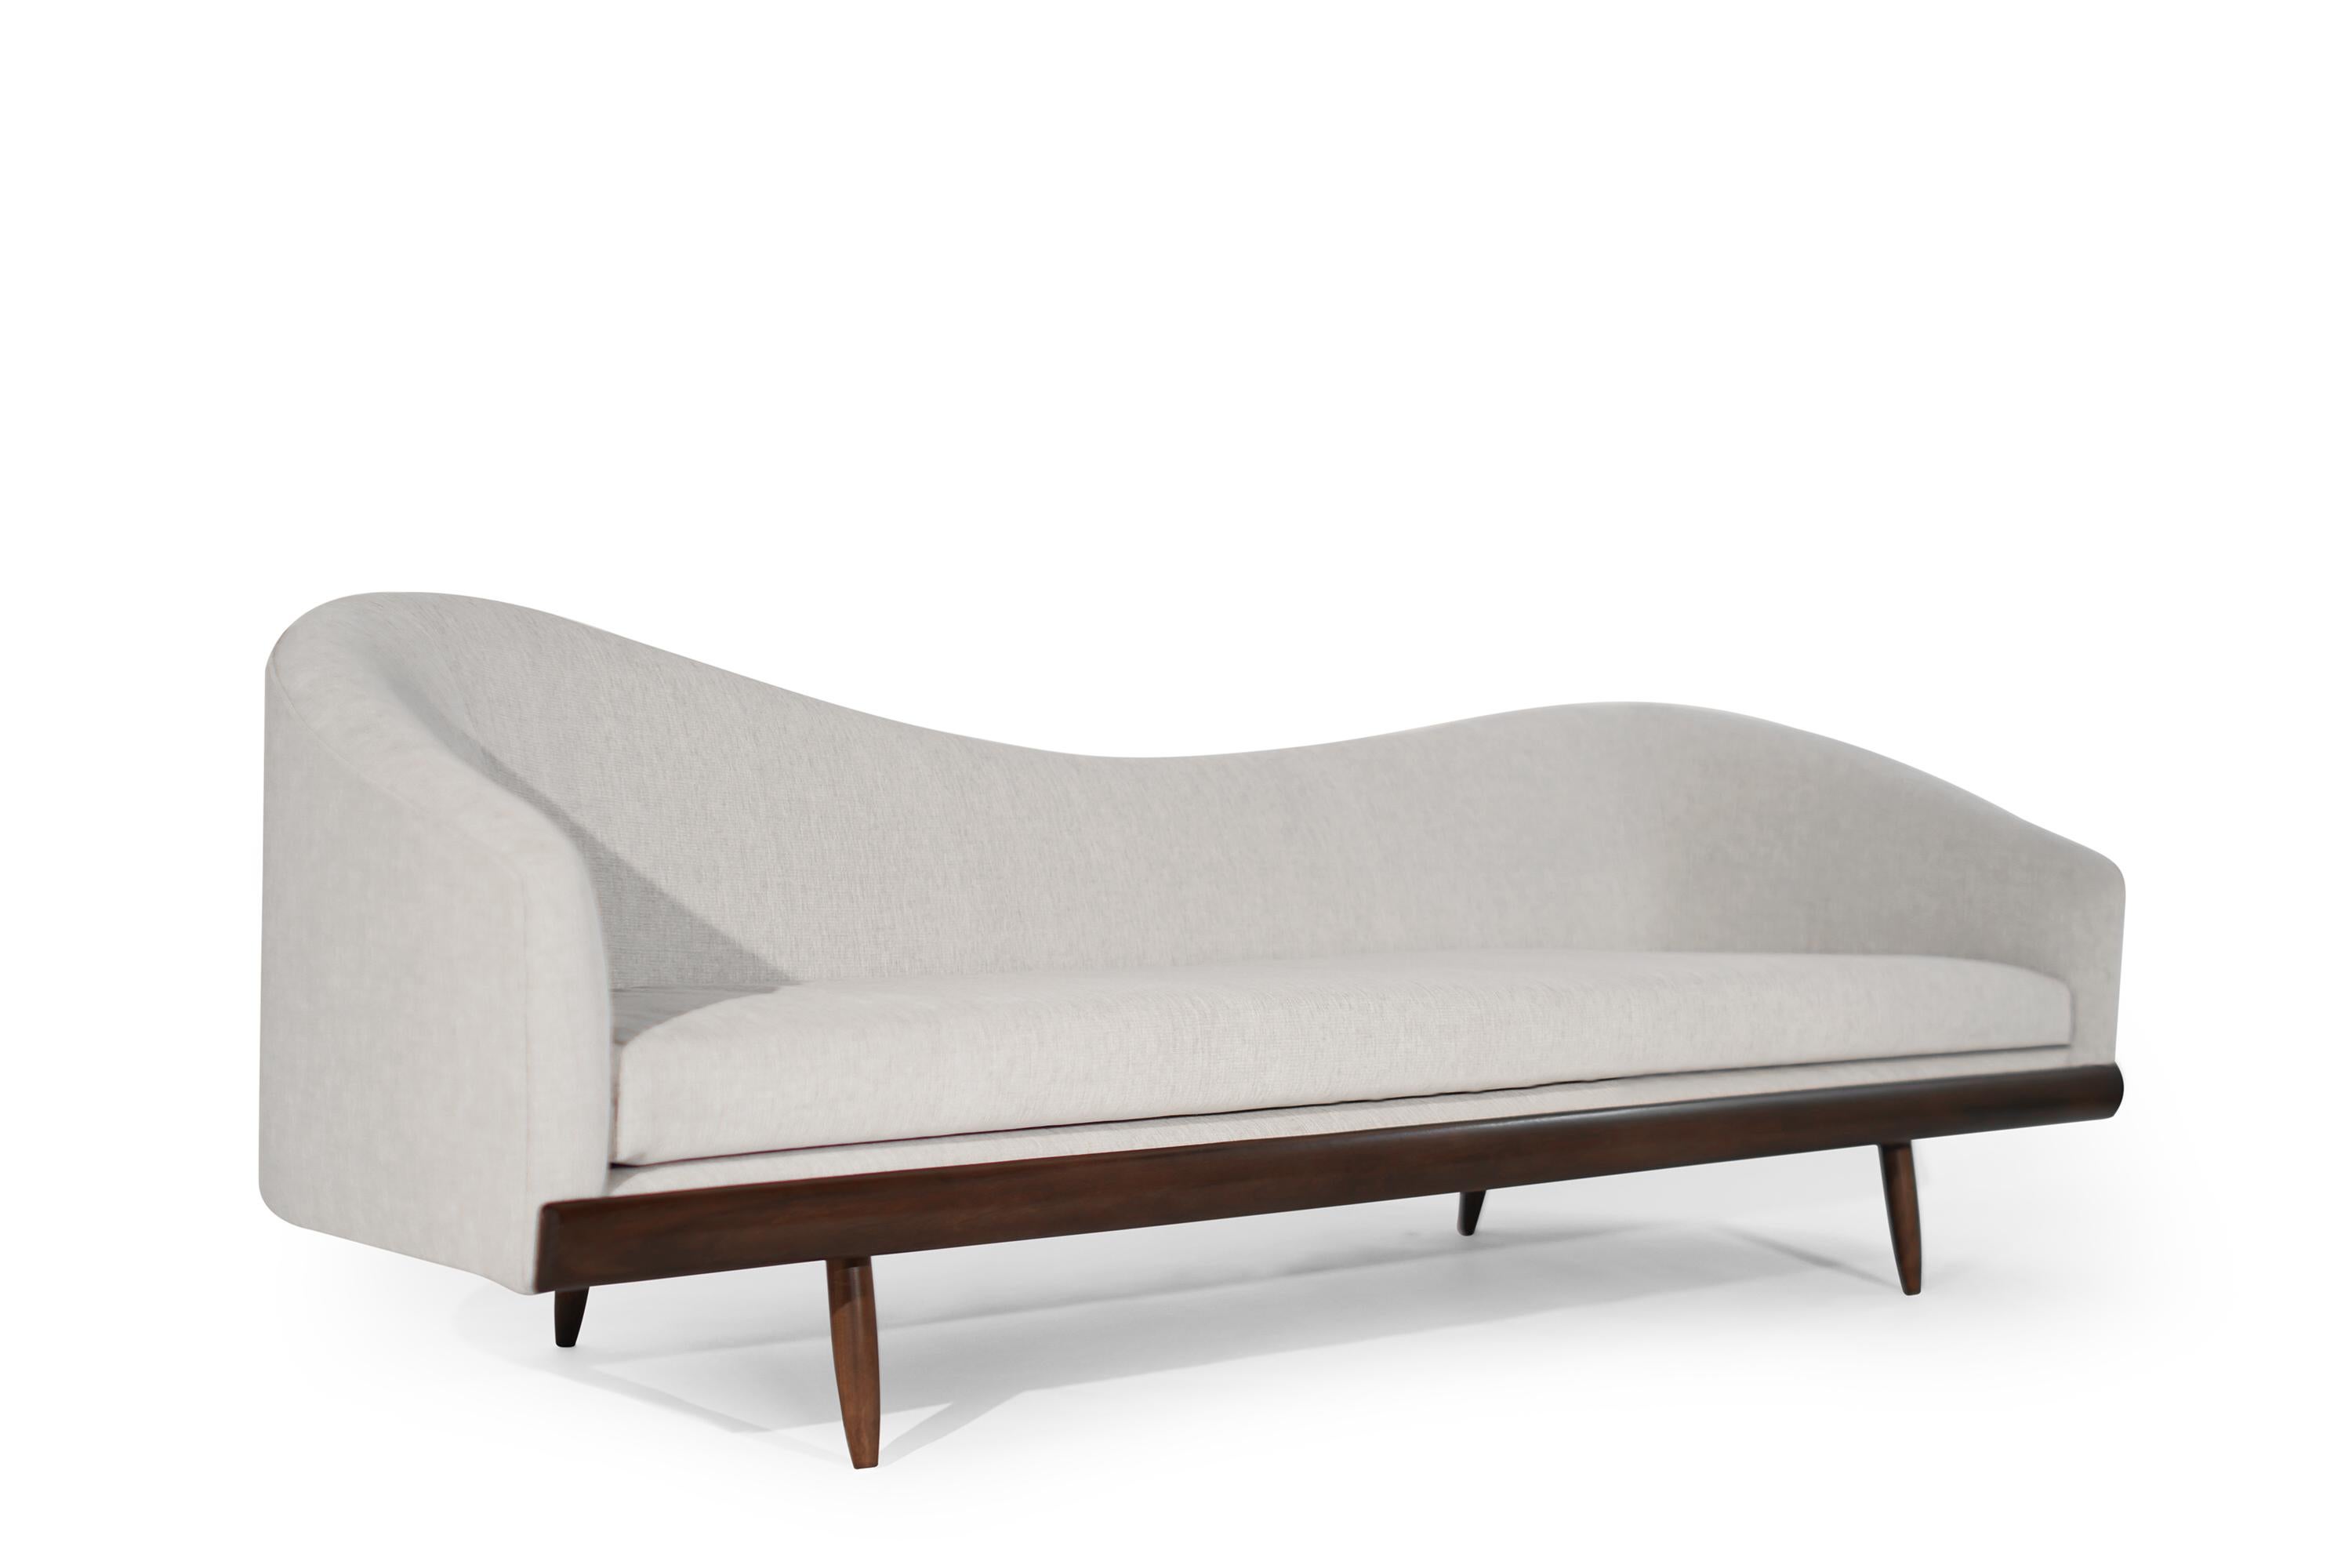 Rare oasis sofa designed by Adrian Pearsall for Craft Associates, circa 1950s. Newly upholstered in grey twill by Holly Hunt. Original front stretcher fully restored. New walnut legs.